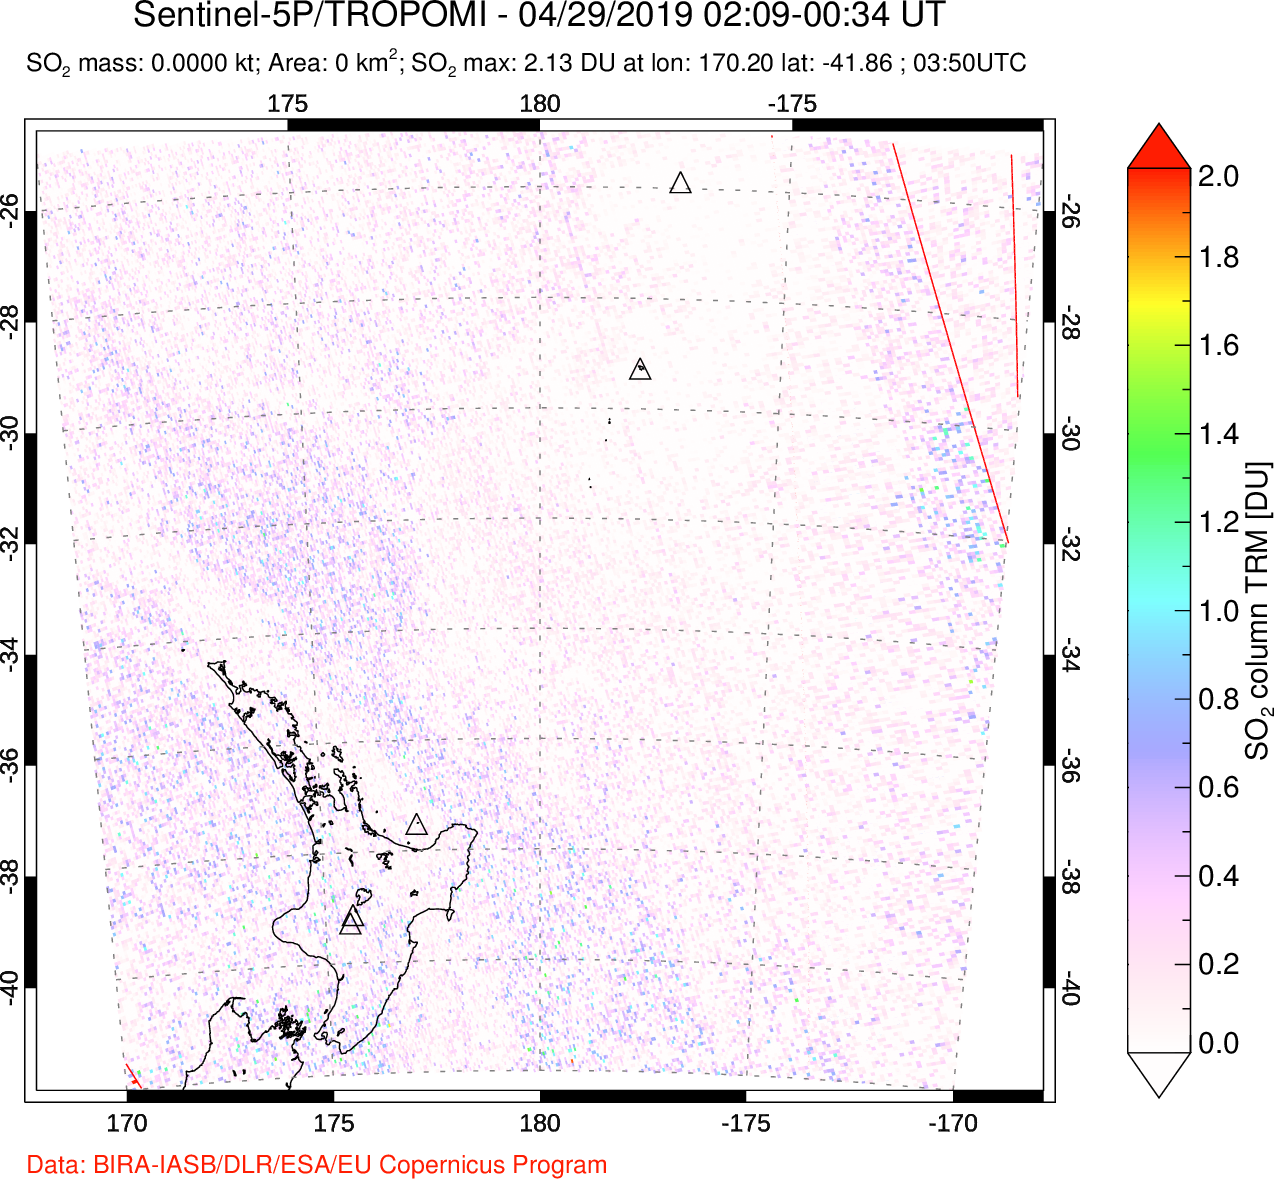 A sulfur dioxide image over New Zealand on Apr 29, 2019.